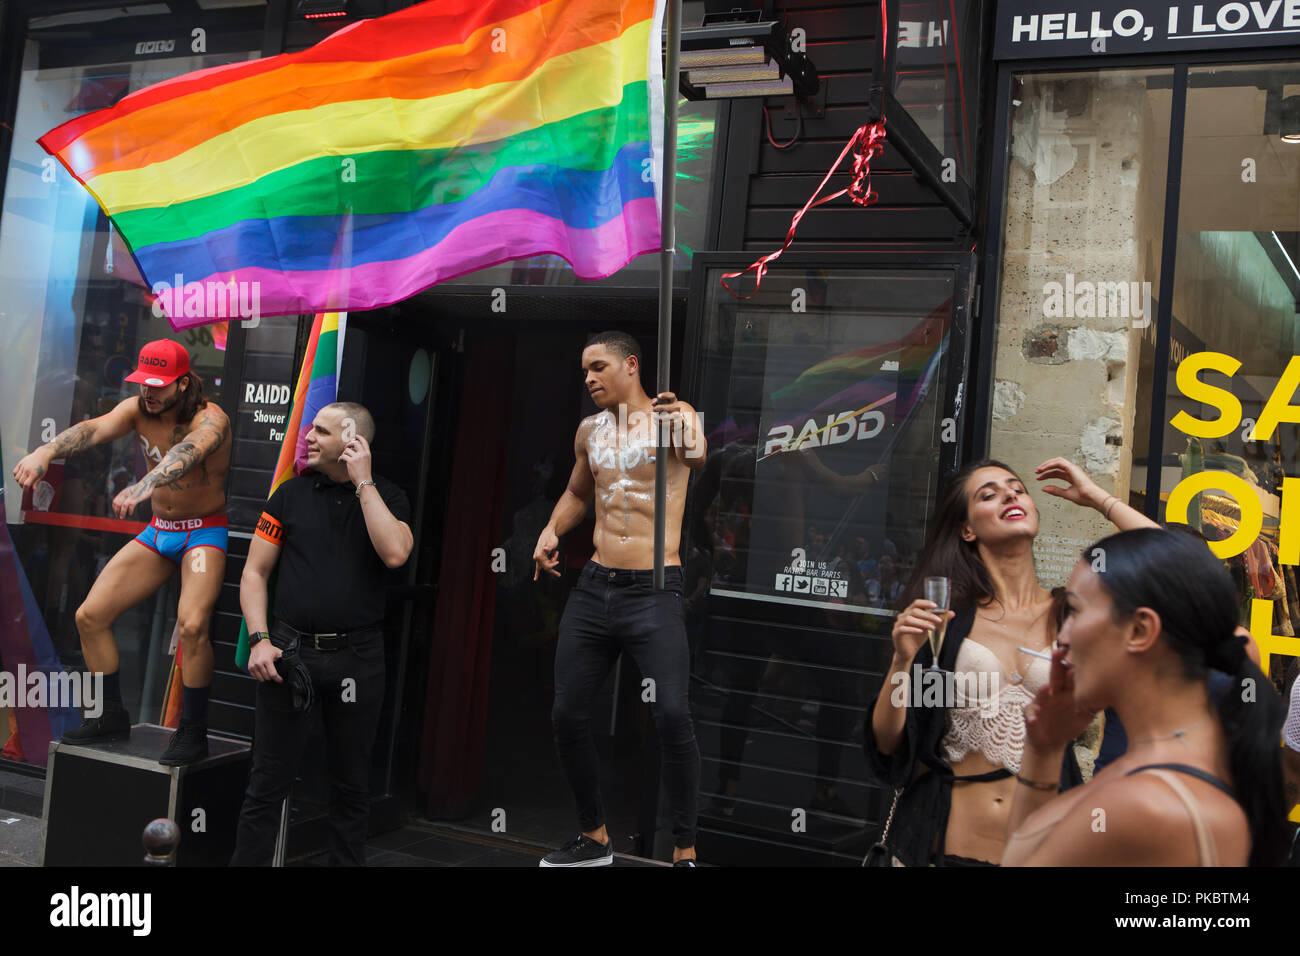 Shirtless muscular go-go dancer performs with a rainbow flag during a  street party outside the Raidd Bar in occasion the Paris Gay Pride (Marche  des Fiertés) in Paris, France, on 30 June